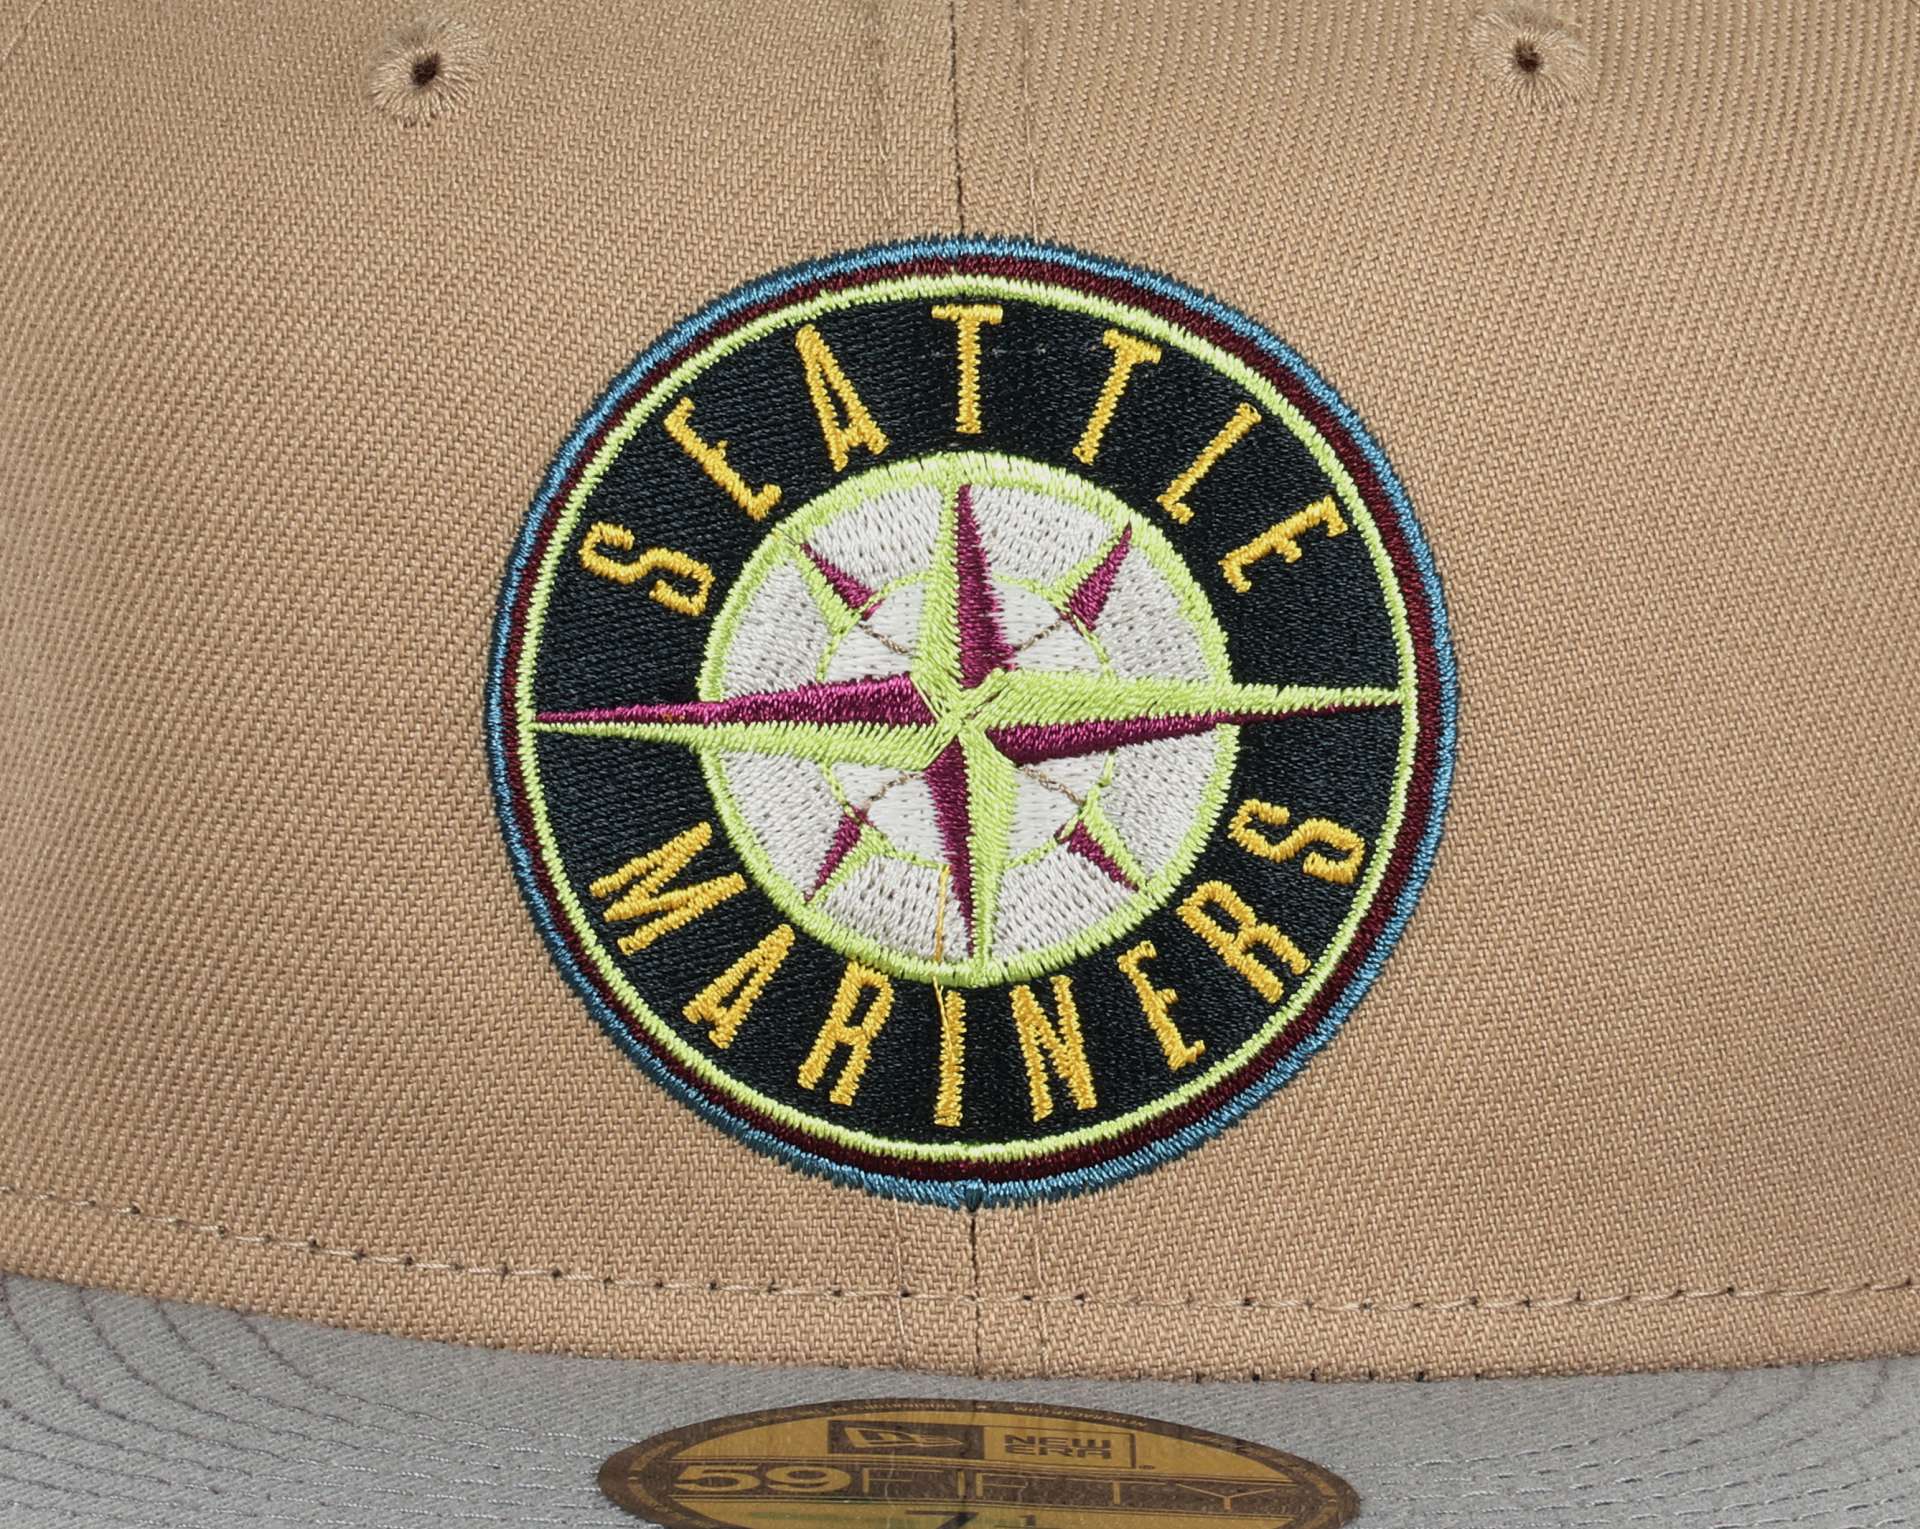 Seattle Mariners MLB Cooperstown 30th Anniversary Sidepatch Camel Misty Cardinal 59Fifty Basecap New Era